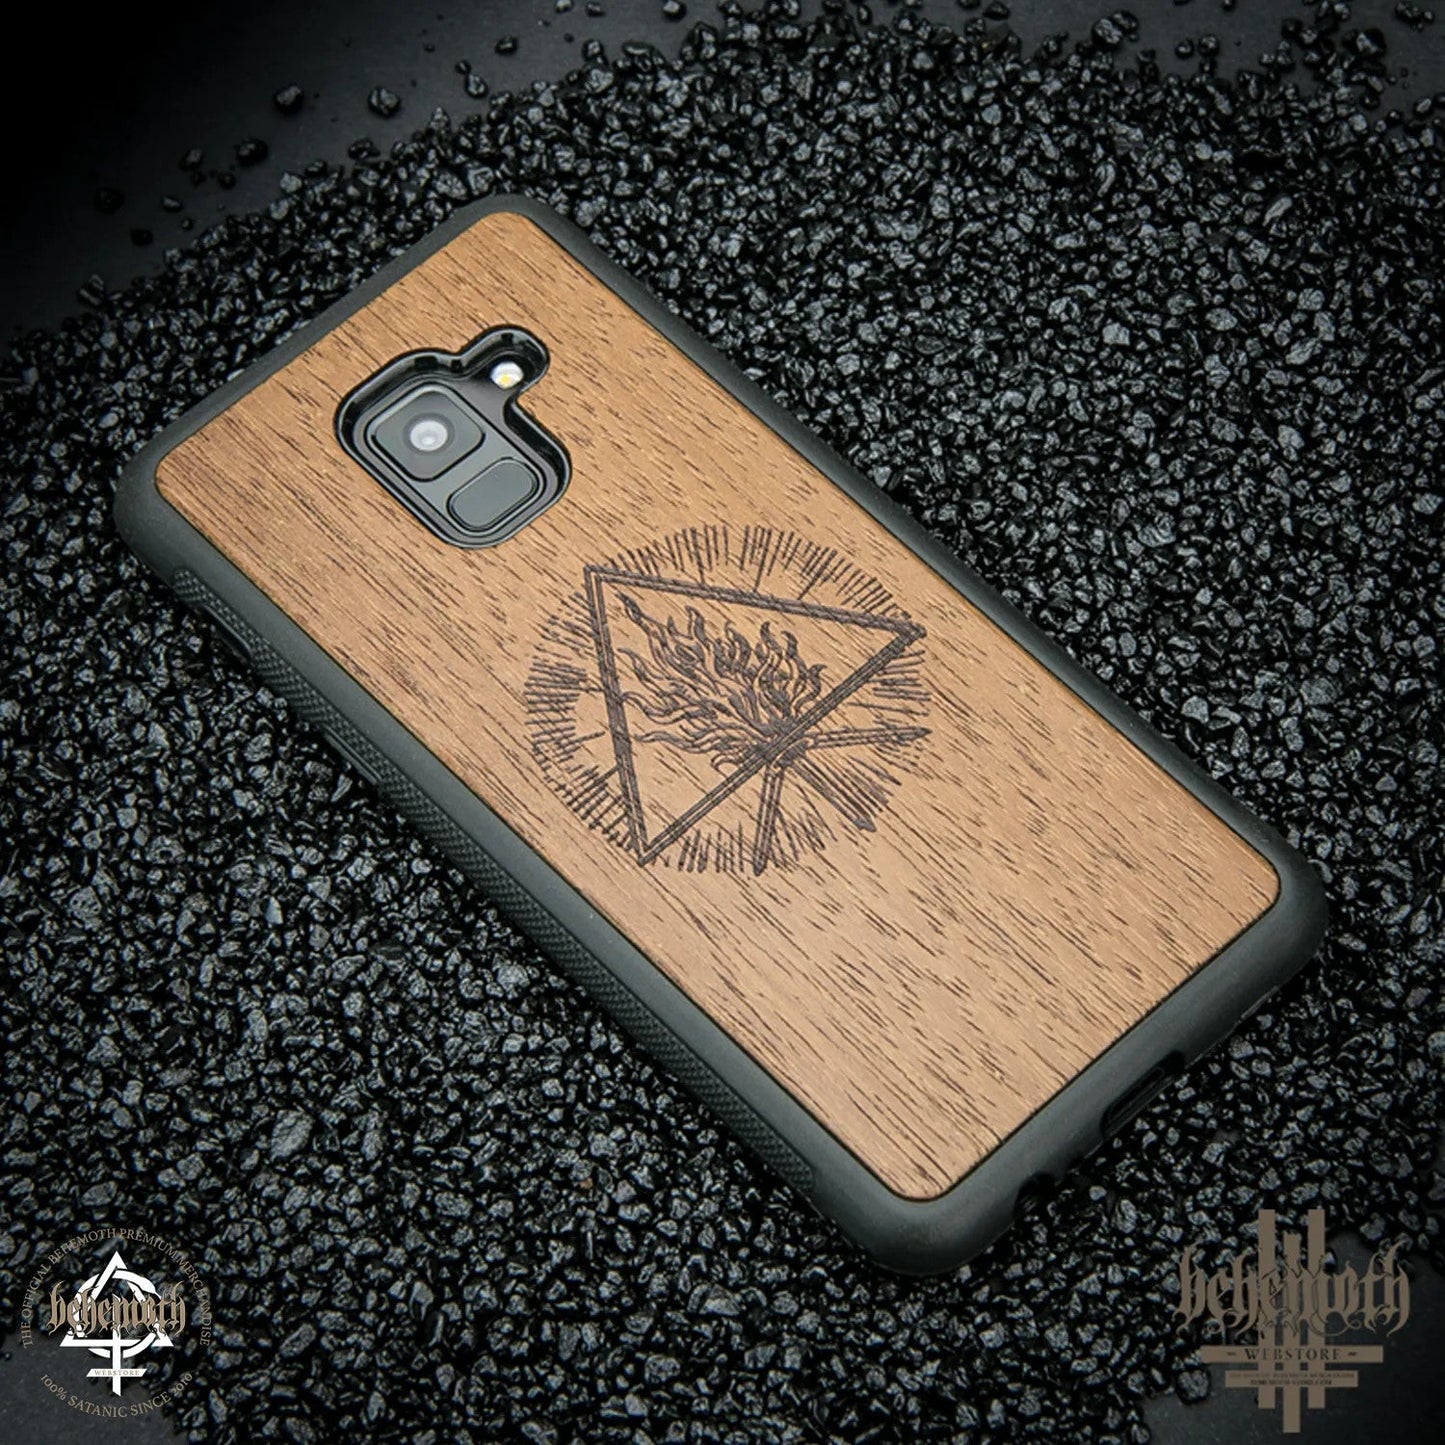 Samsung Galaxy A8 2018  case with wood finishing and Behemoth 'The Unholy Trinity' logo